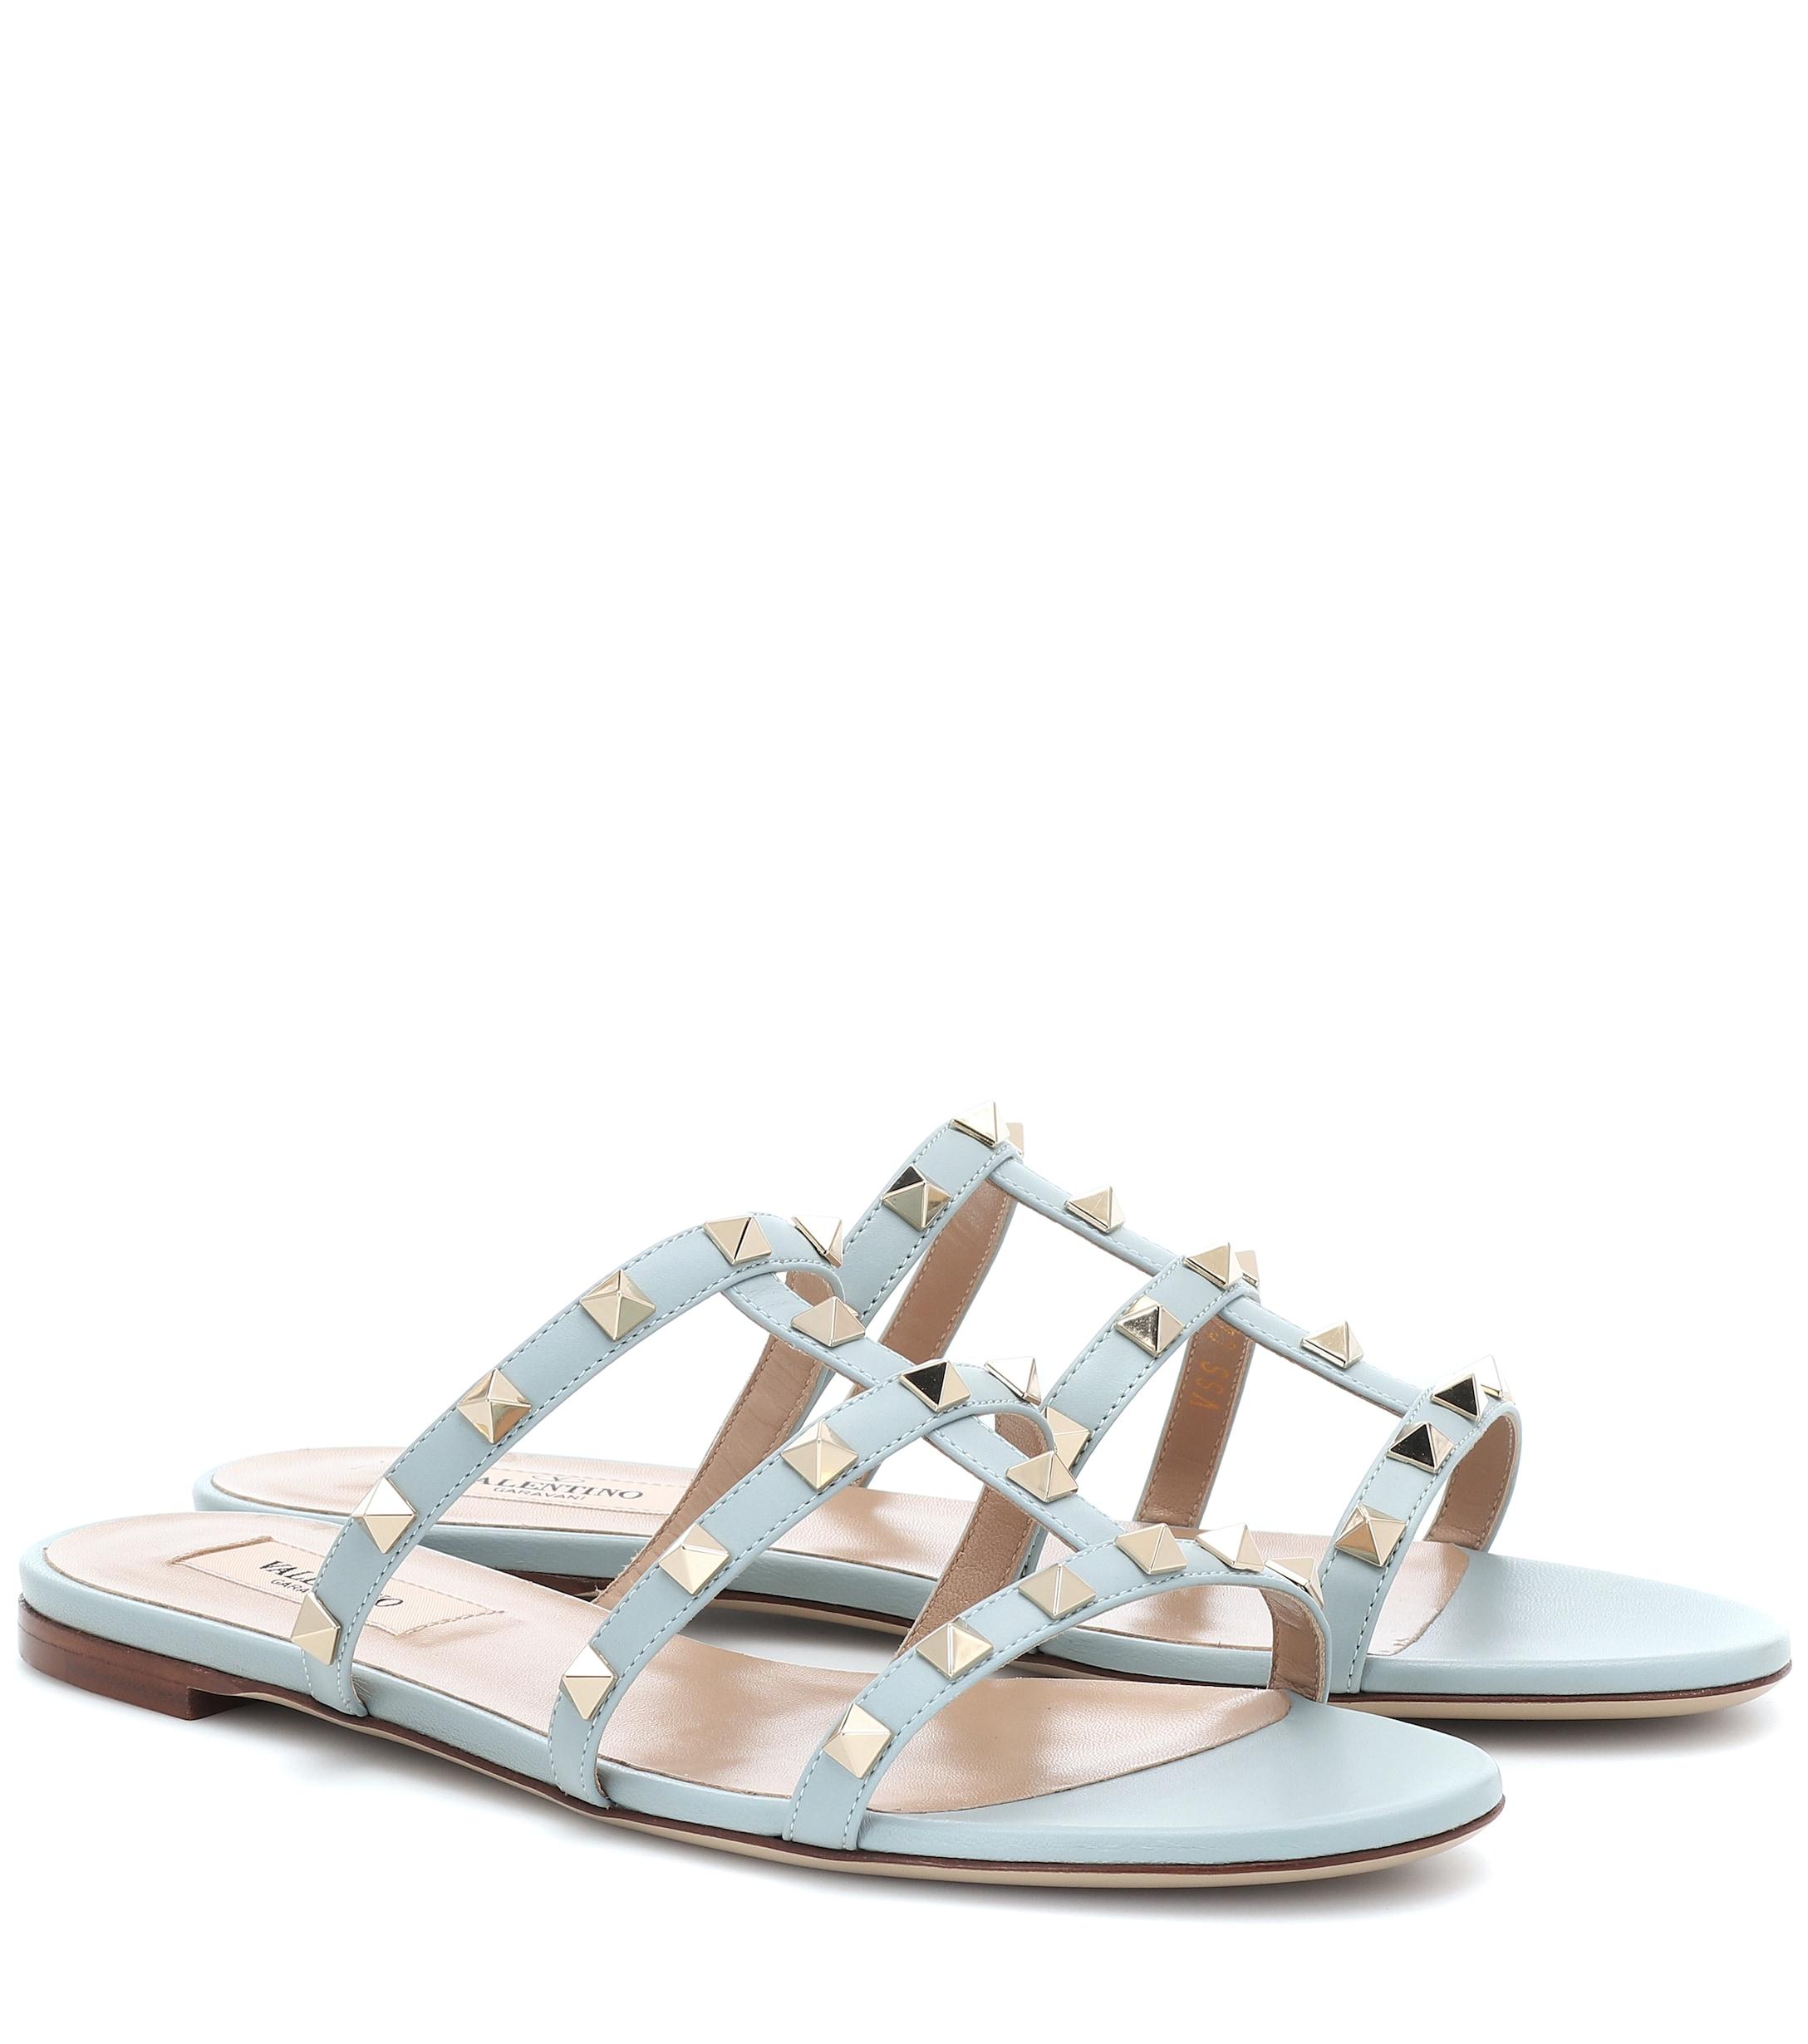 Valentino Rockstud Leather Sandals in Blue - Lyst